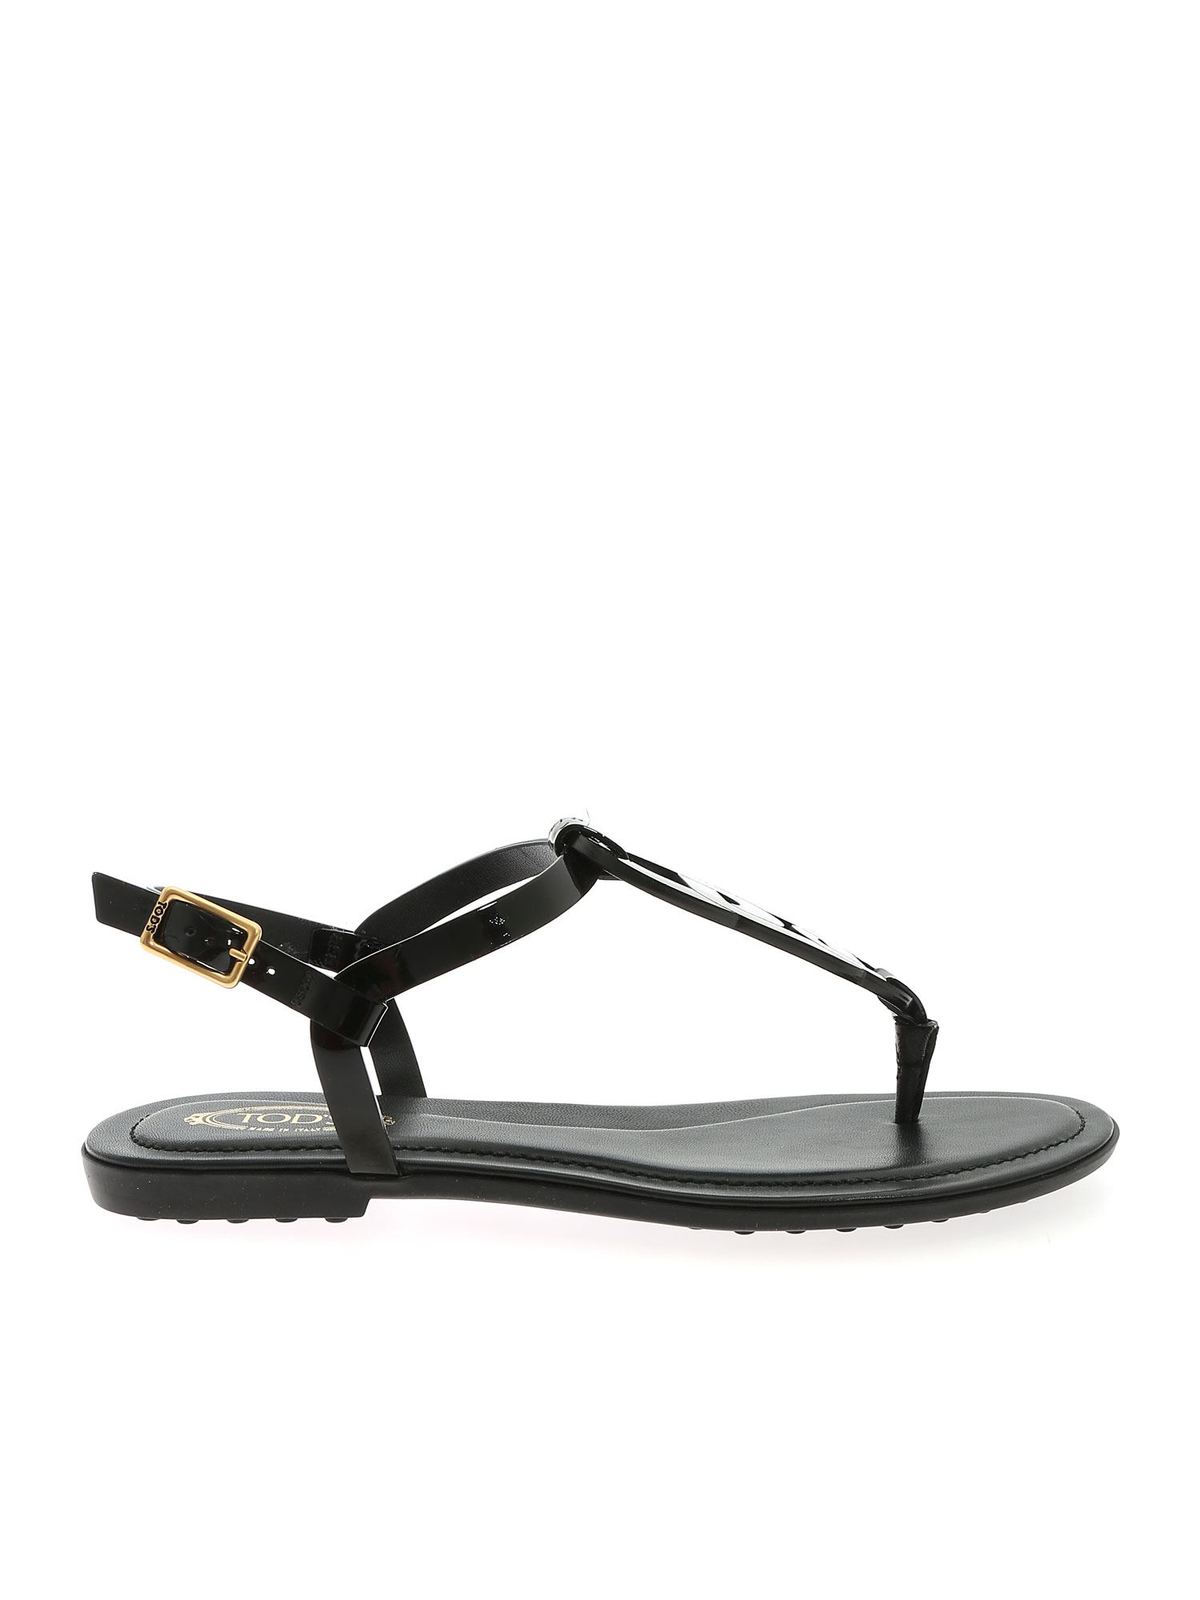 TOD'S WOVEN DETAIL SANDALS IN BLACK